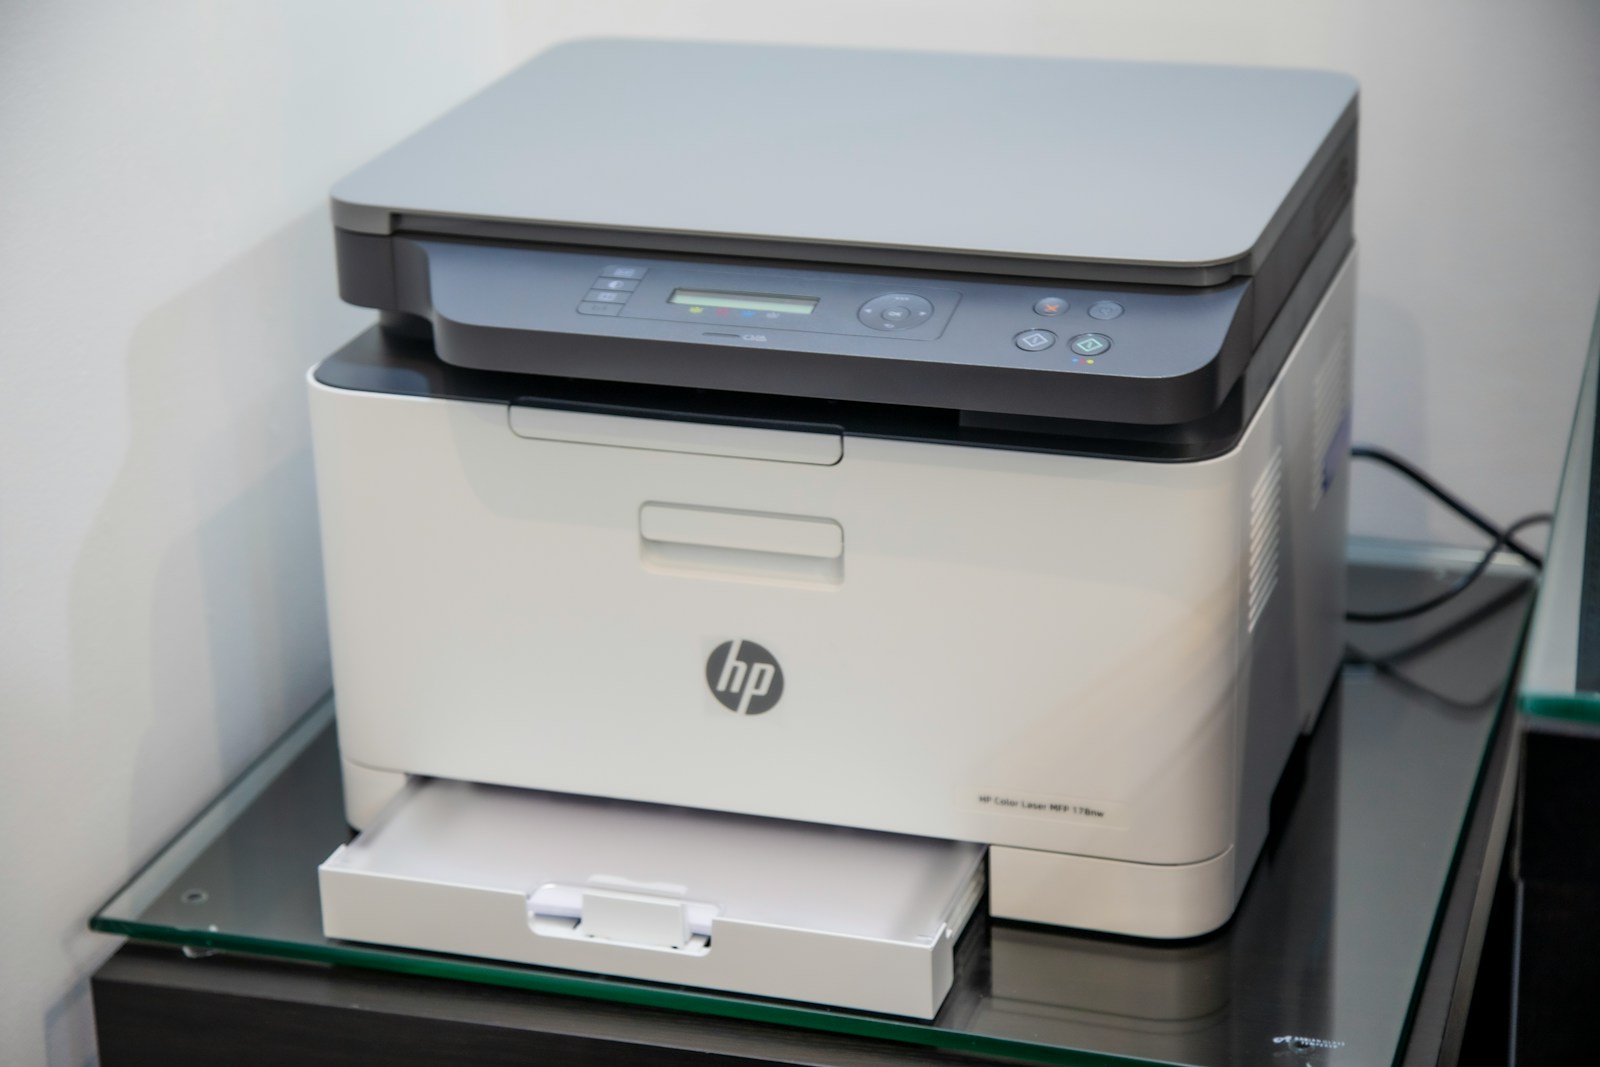 Comprehensive Guide to Troubleshooting HP Printers